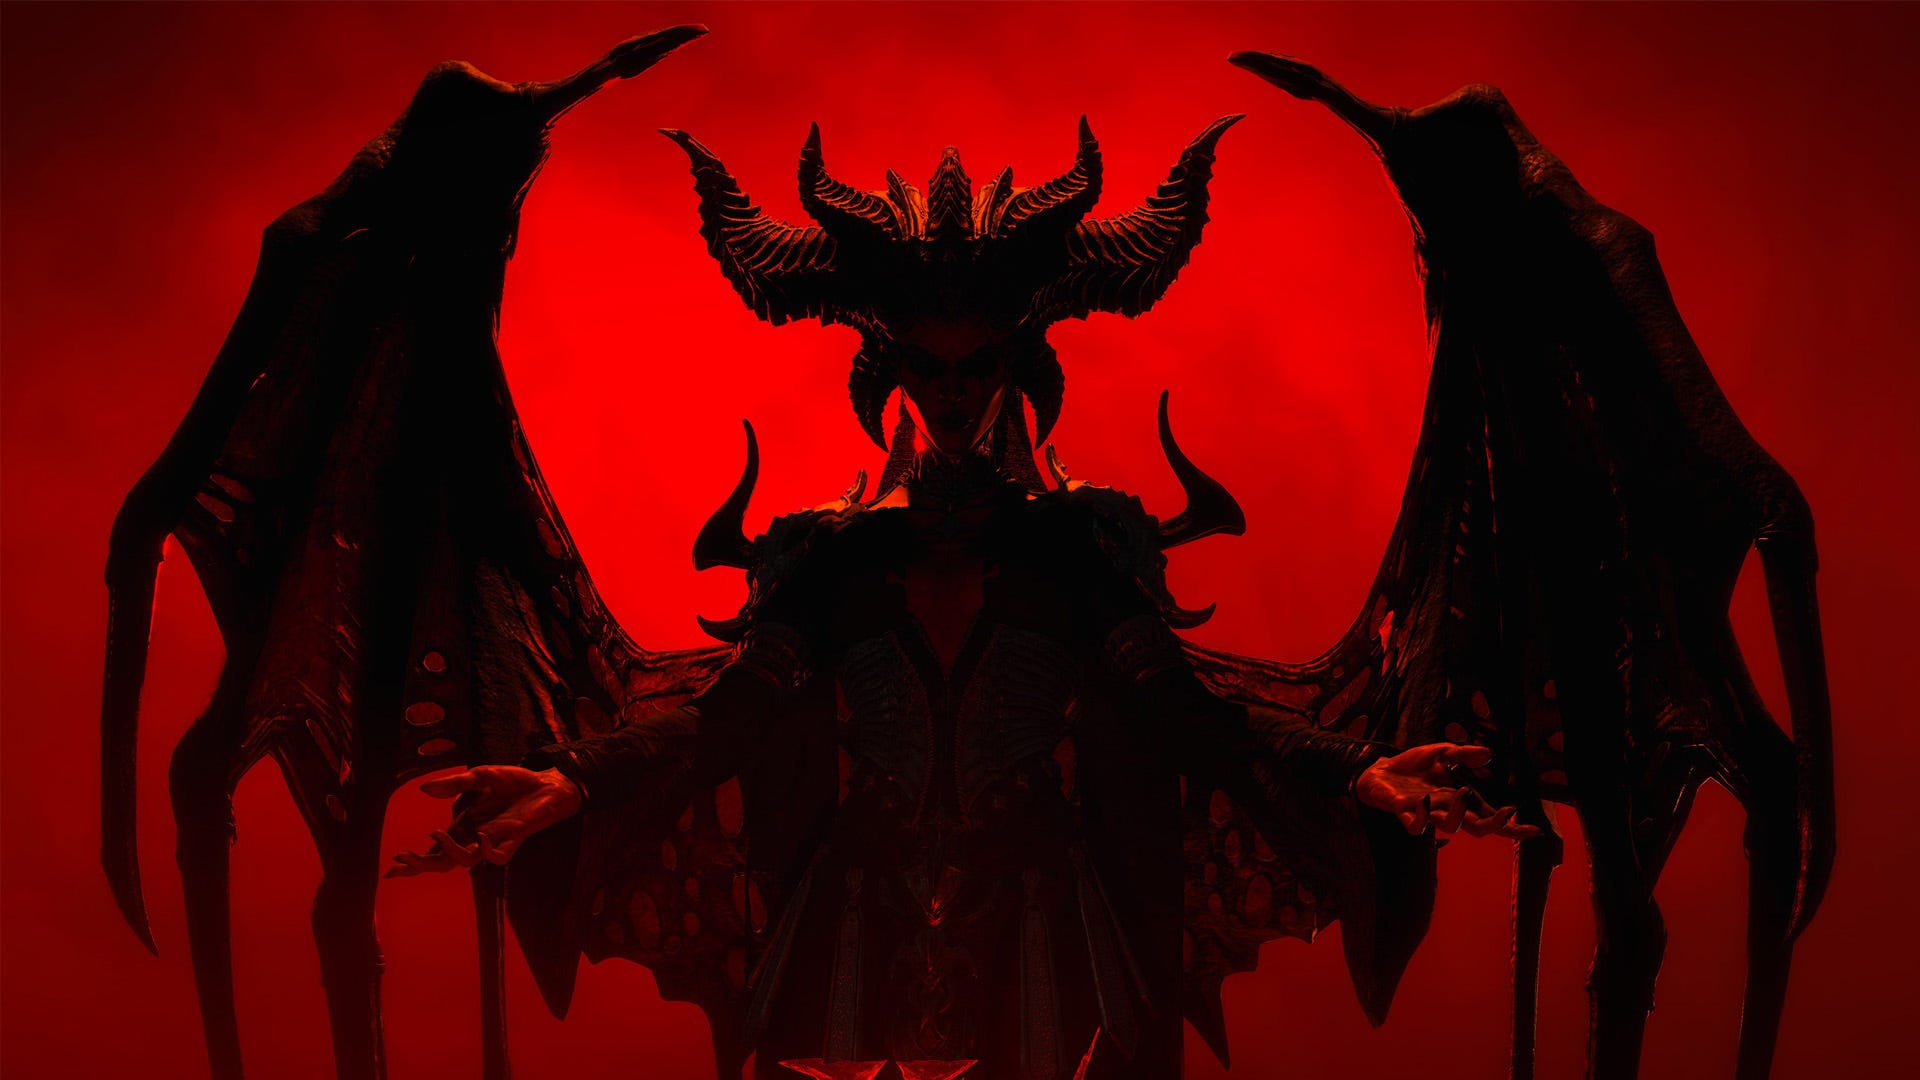 A Diablo show isn’t in the works, but the head of the series certainly likes the idea of one